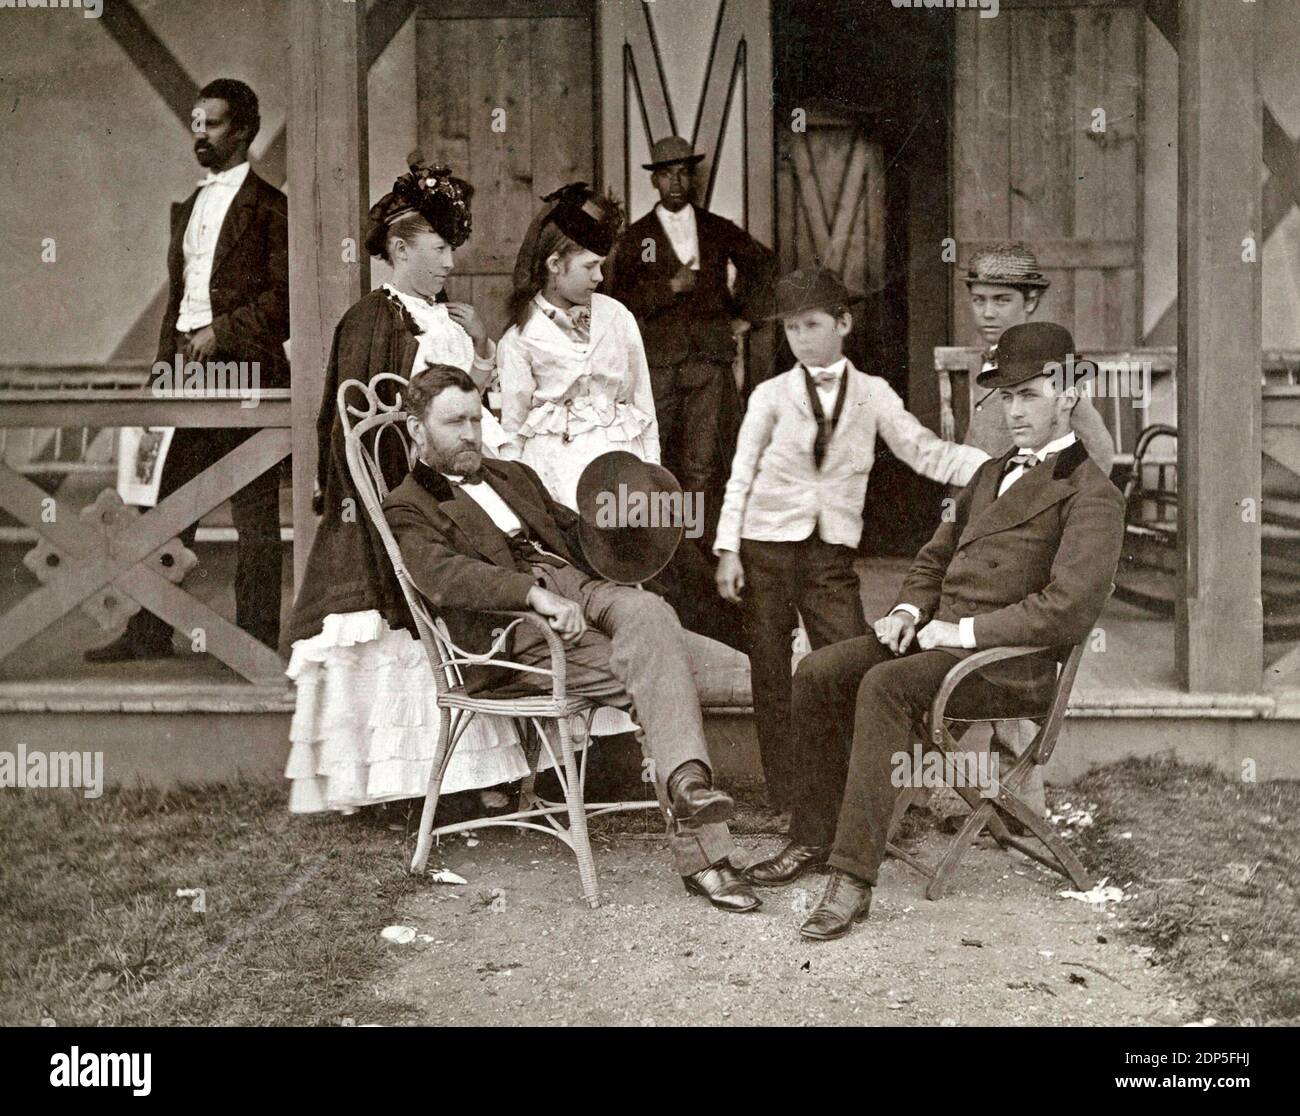 Ulysses Grant and Family at Long Branch, NJ by Pach Brothers, NY, 1870. Grant and wife, Julia Dent, and their four children; Jesse, Ulysses Jr., Nellie, and Frederick in front of their cottage. Also present are two black men, whose identities are unknown. 1870 Stock Photo